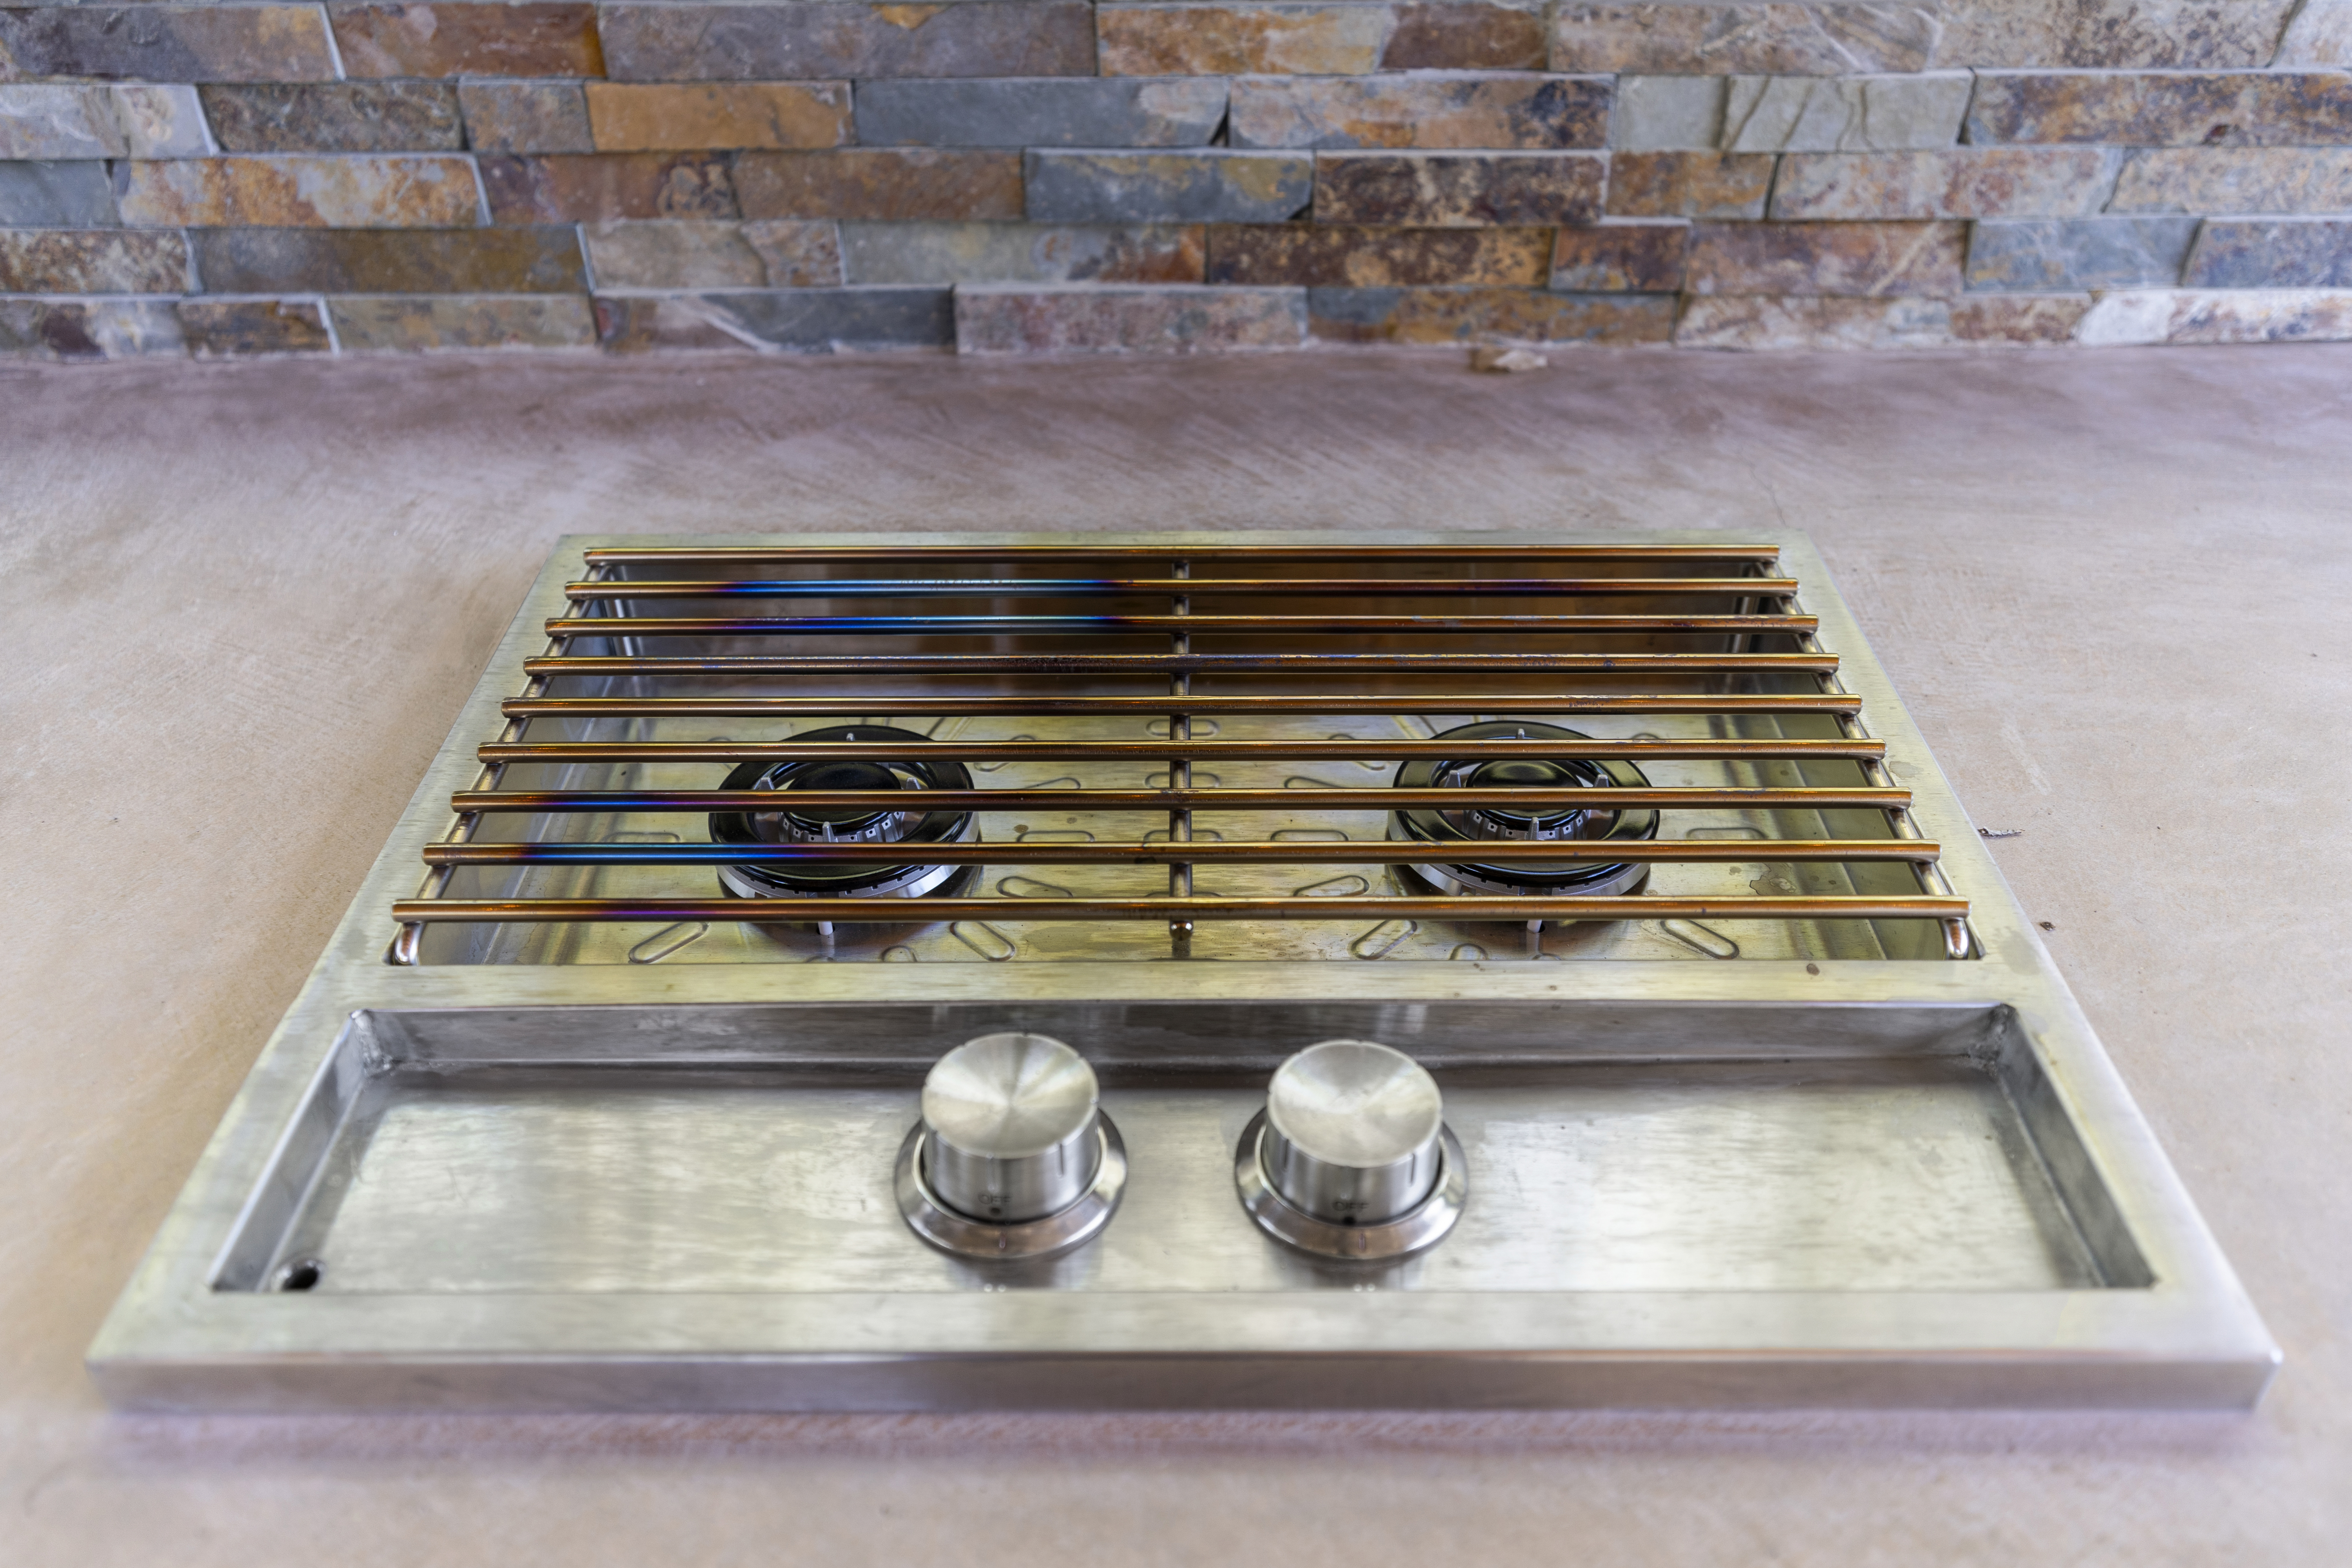 Built-in barbecue grill set into polished stone countertop